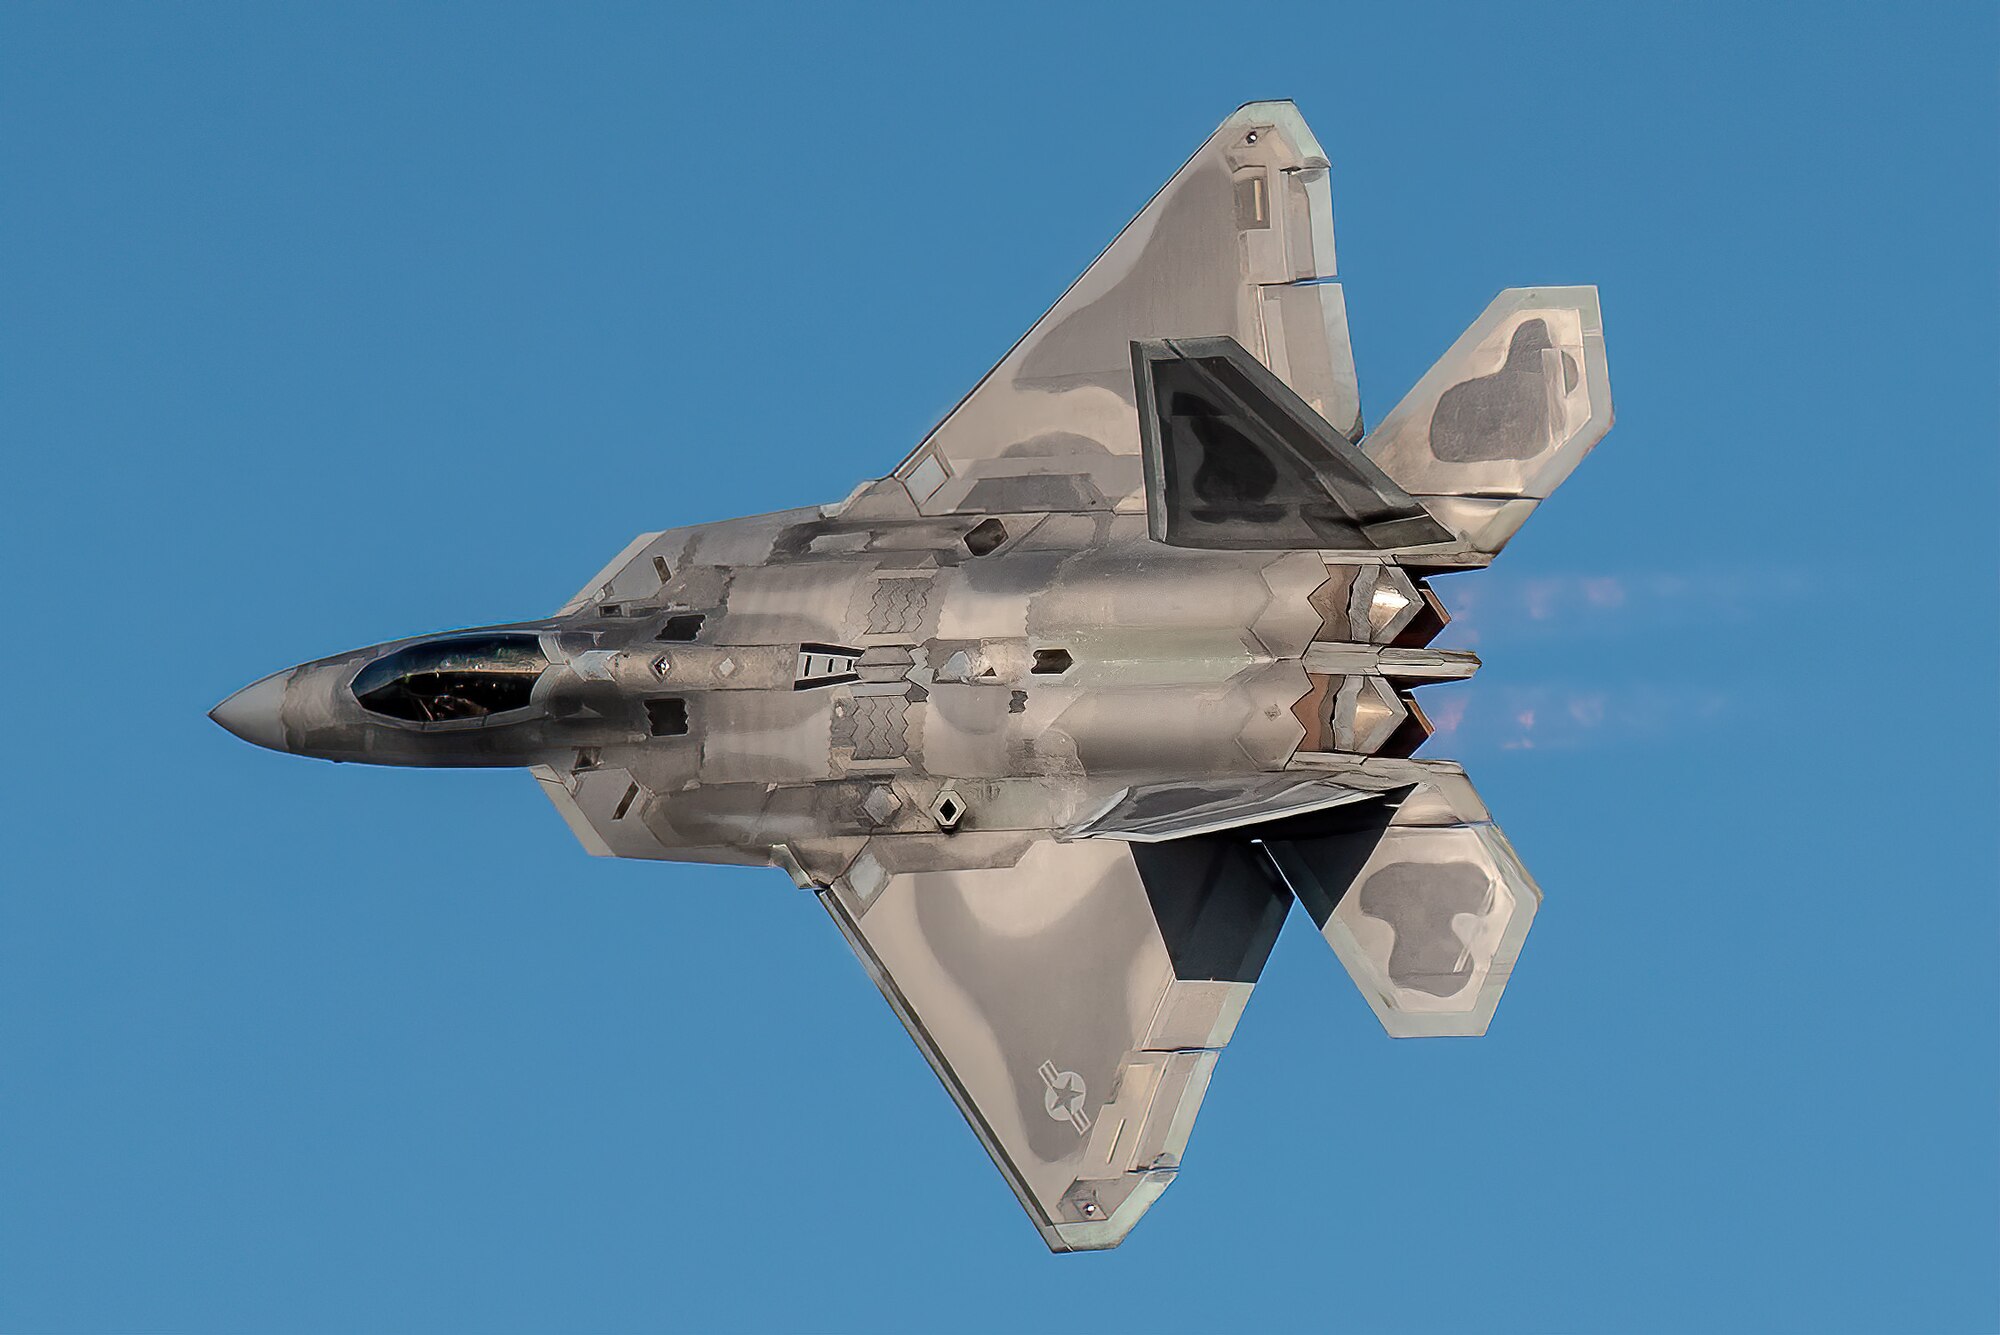 The U.S. Air Force F-22 Raptor Demo Team from the 1st Fighter Wing at Langley Air Force Base, Va., performs an aerial demonstration over the Ohio River in downtown Louisville, Ky., April 23, 2022 as part of the Thunder Over Louisville air show. This year’s event celebrated the 75th anniversary of the United States Air Force. (U.S. Air National Guard photo by Dale Greer)